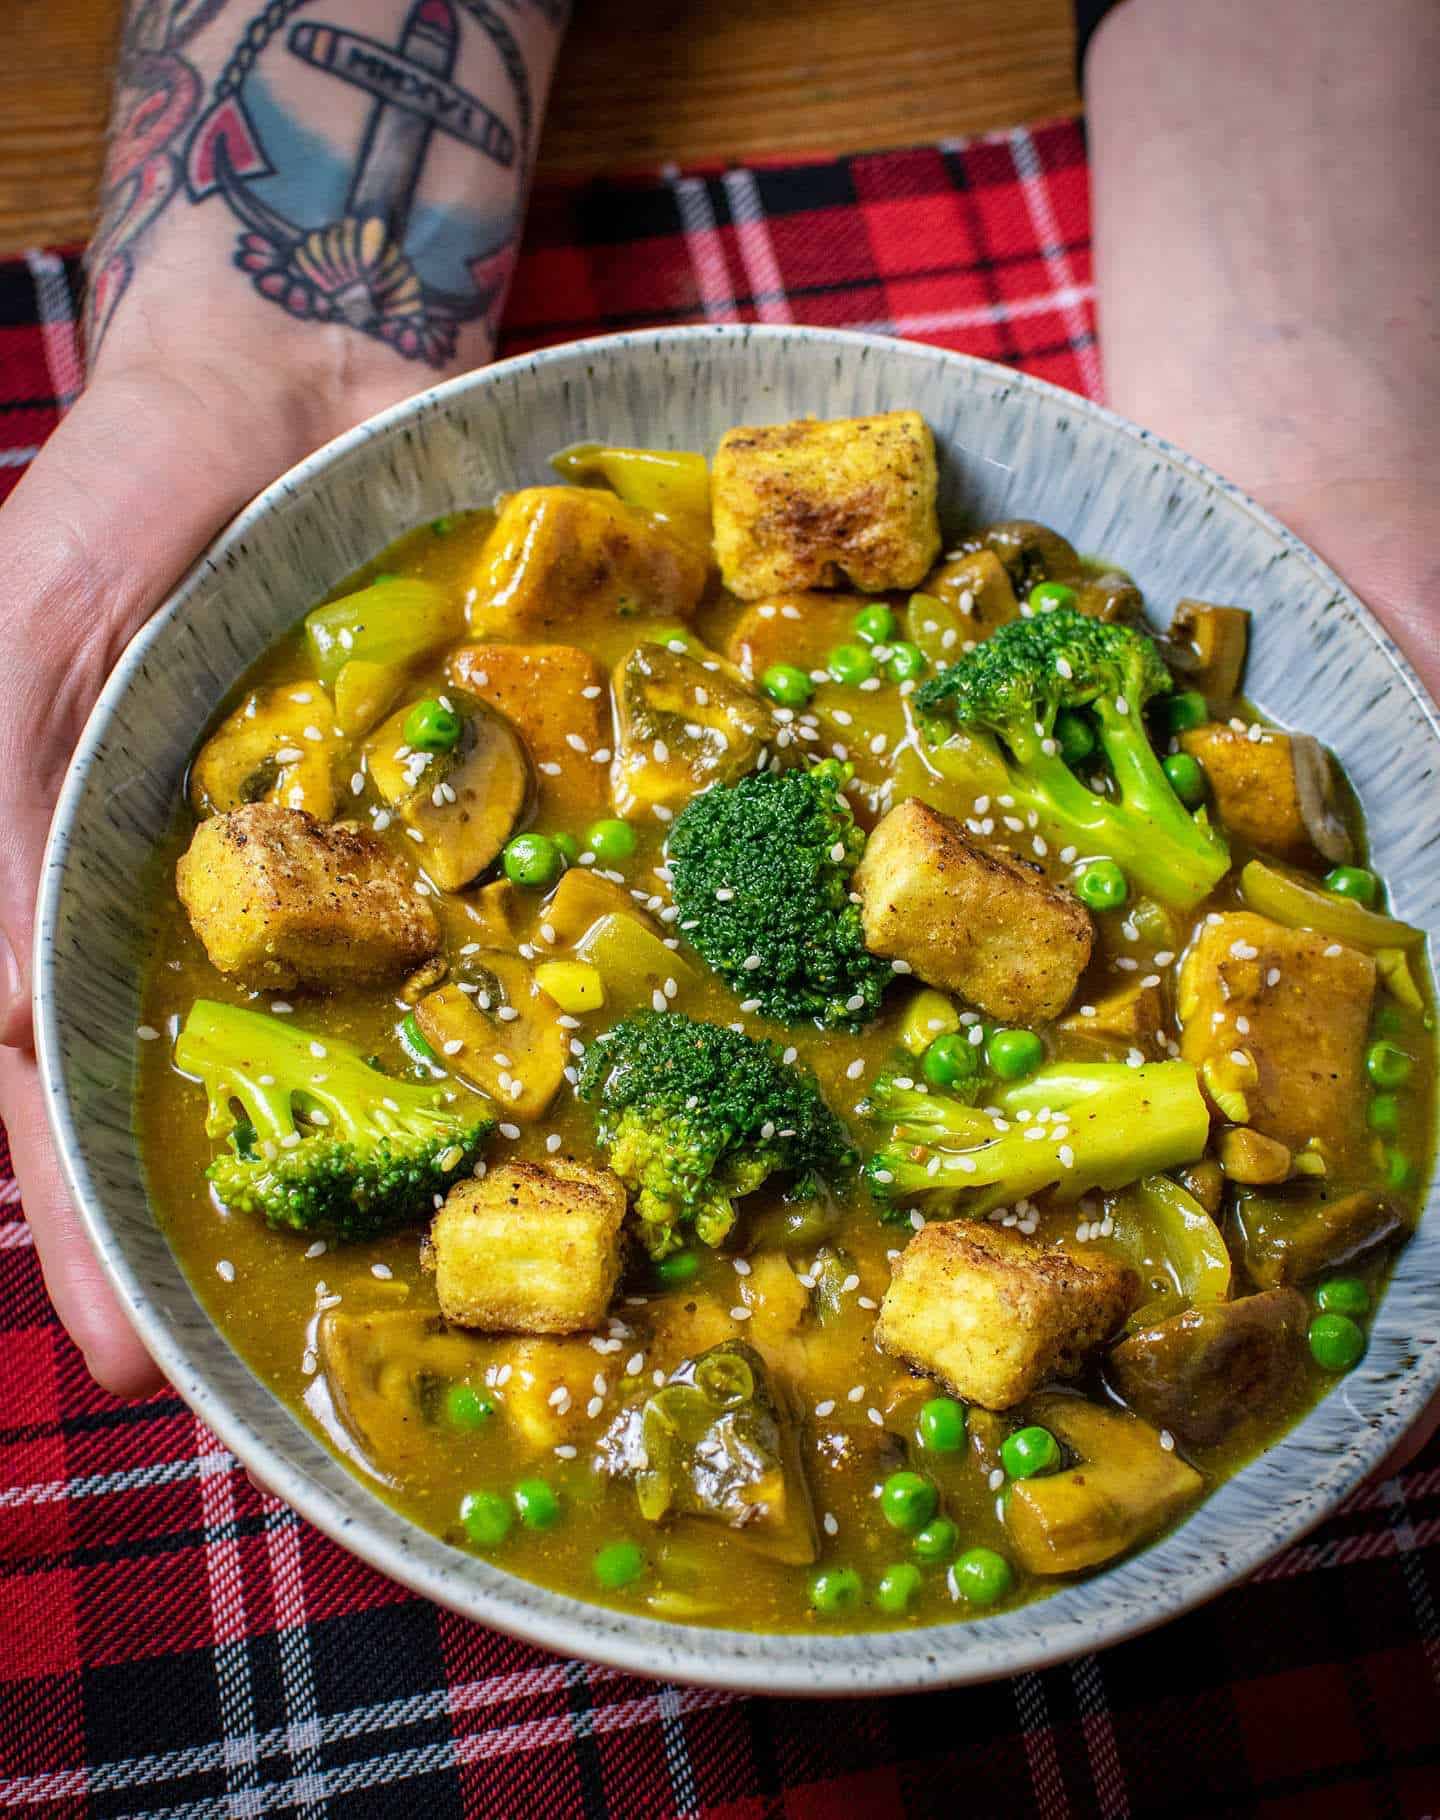 Hands holding a bowl of vegan Chinese curry showing sauce, tofu, broccoli, peas and onion